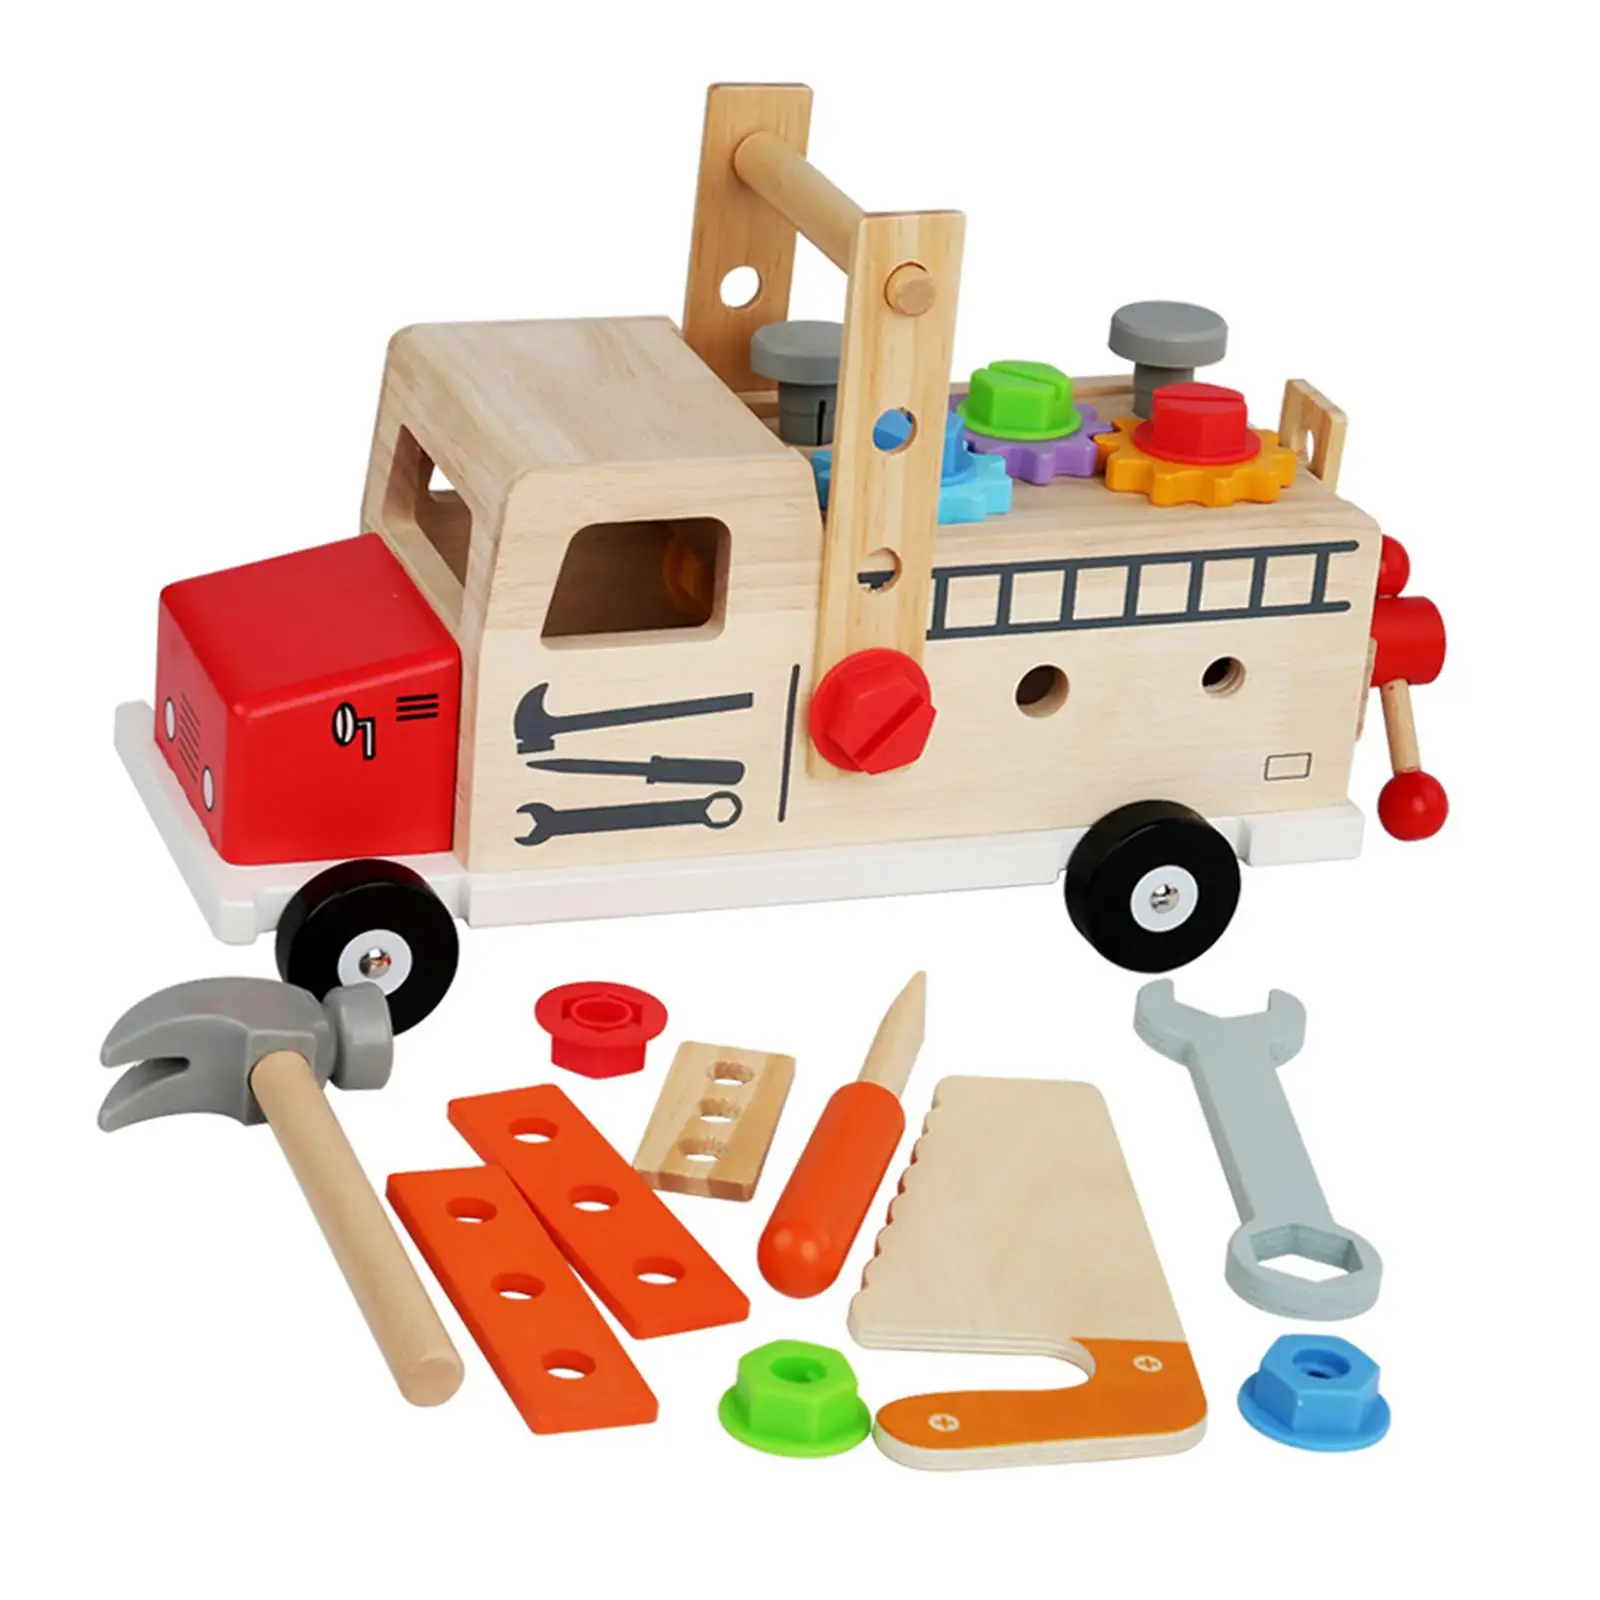 Construction Toy Educational Wood Kids Tool Set Pretend Play Tool Kits for Children 3 4 5 6 Years Old Boys Girls Xmas Present